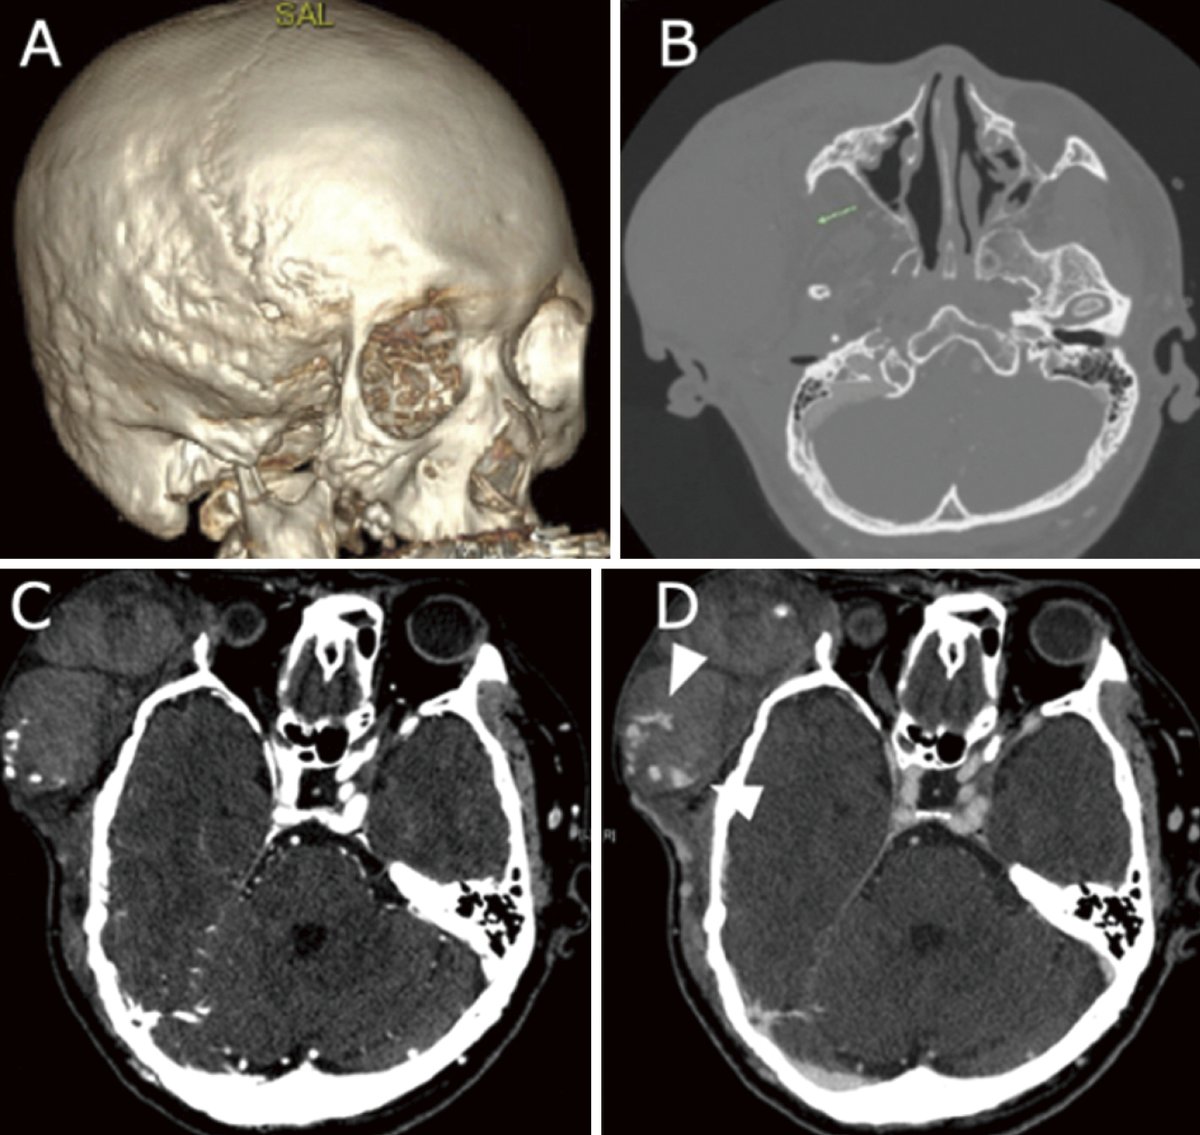 'New Arrival: A Case of Neurofibromatosis Type 1 Diagnosed after Idiopathic Rupture of Superficial Temporal Artery Pseudoaneurysm Requiring Endovascular Treatment
doi.org/10.2176/jns-nm…
#Neuroivr #NeurofibromatosisType1 #IdiopathicSuperficialTemporalArteryPseudoaneurysm